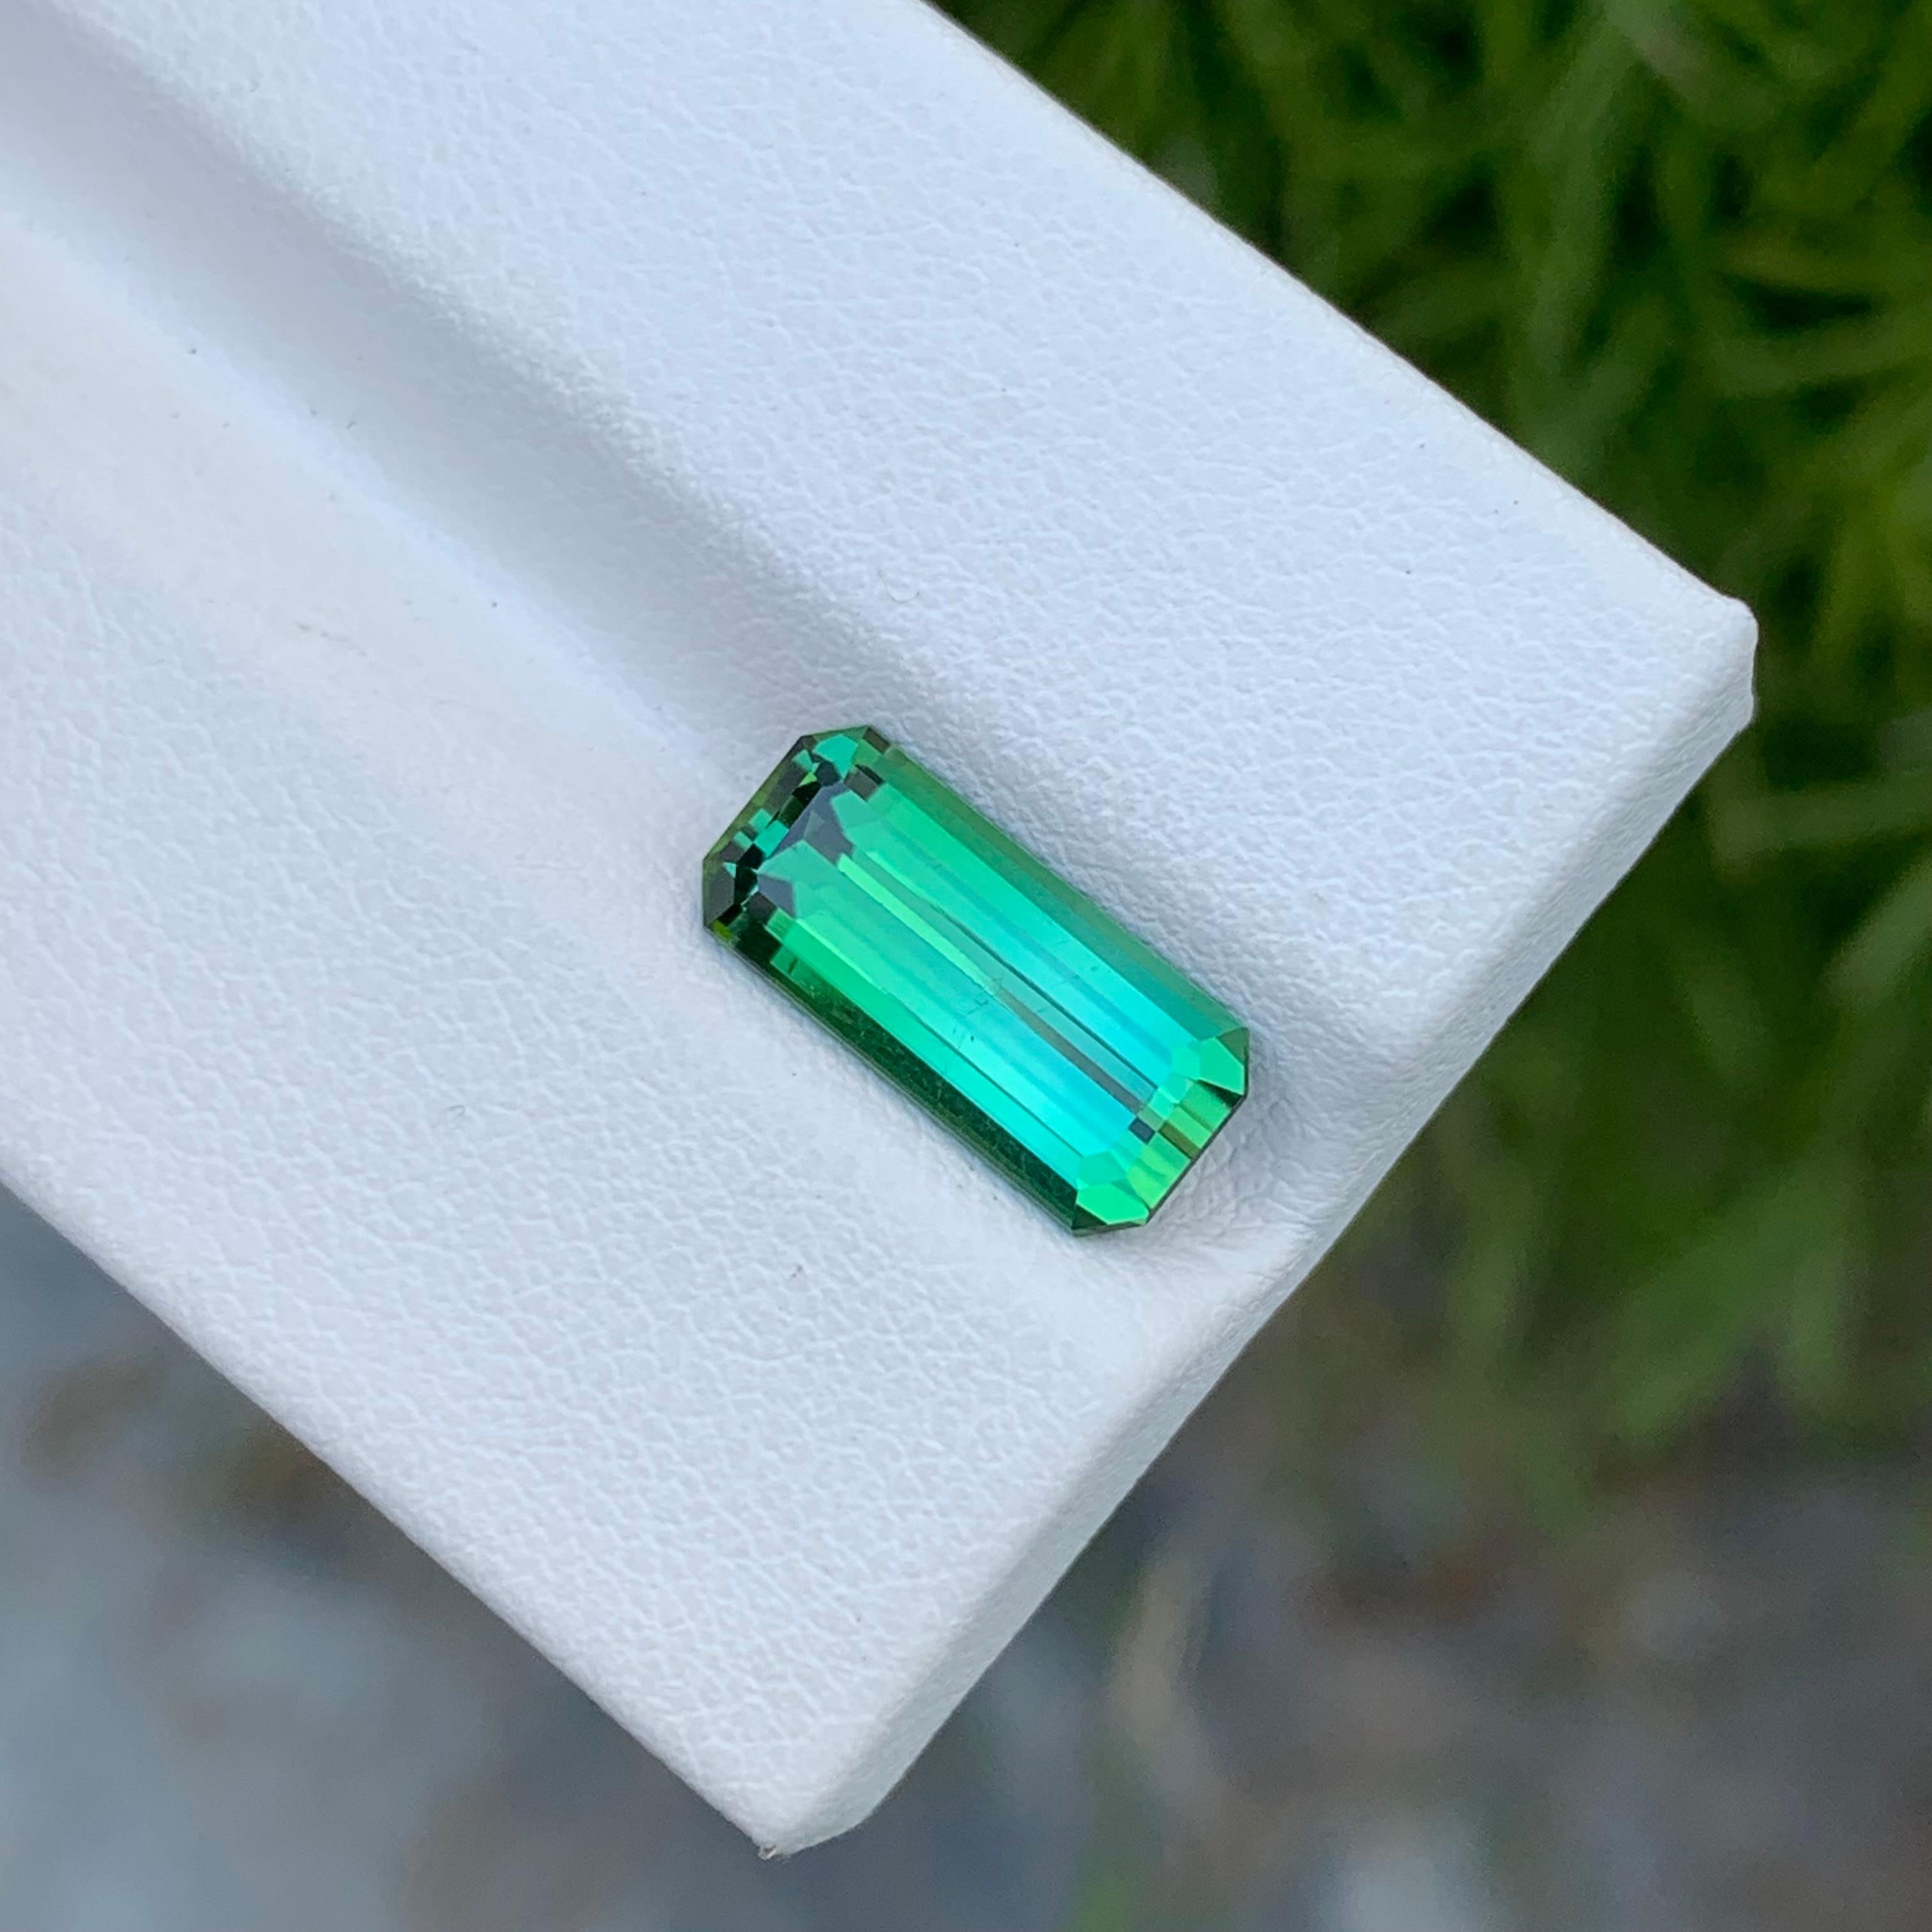 Loose Bright Green Tourmaline

Weight: 3.15 Carats
Dimension: 13 x 6 x 4.5 Mm
Colour: Green
Origin: Afghanistan
Certificate: On Demand
Treatment: Non

Tourmaline is a captivating gemstone known for its remarkable variety of colors, making it a